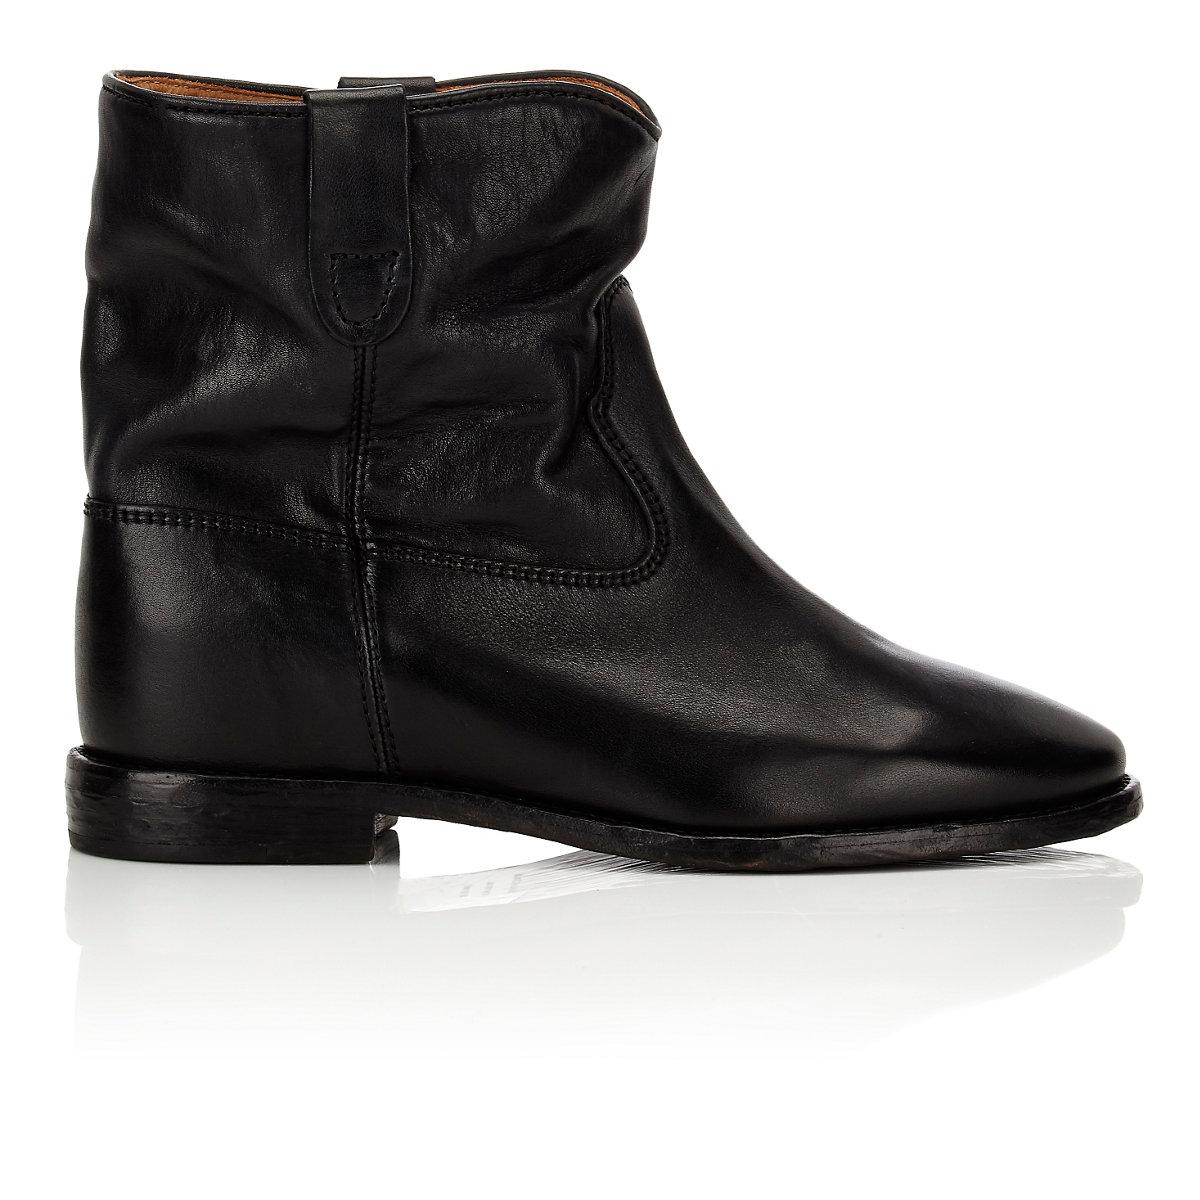 Lyst - Étoile Isabel Marant Cluster Boots in Black